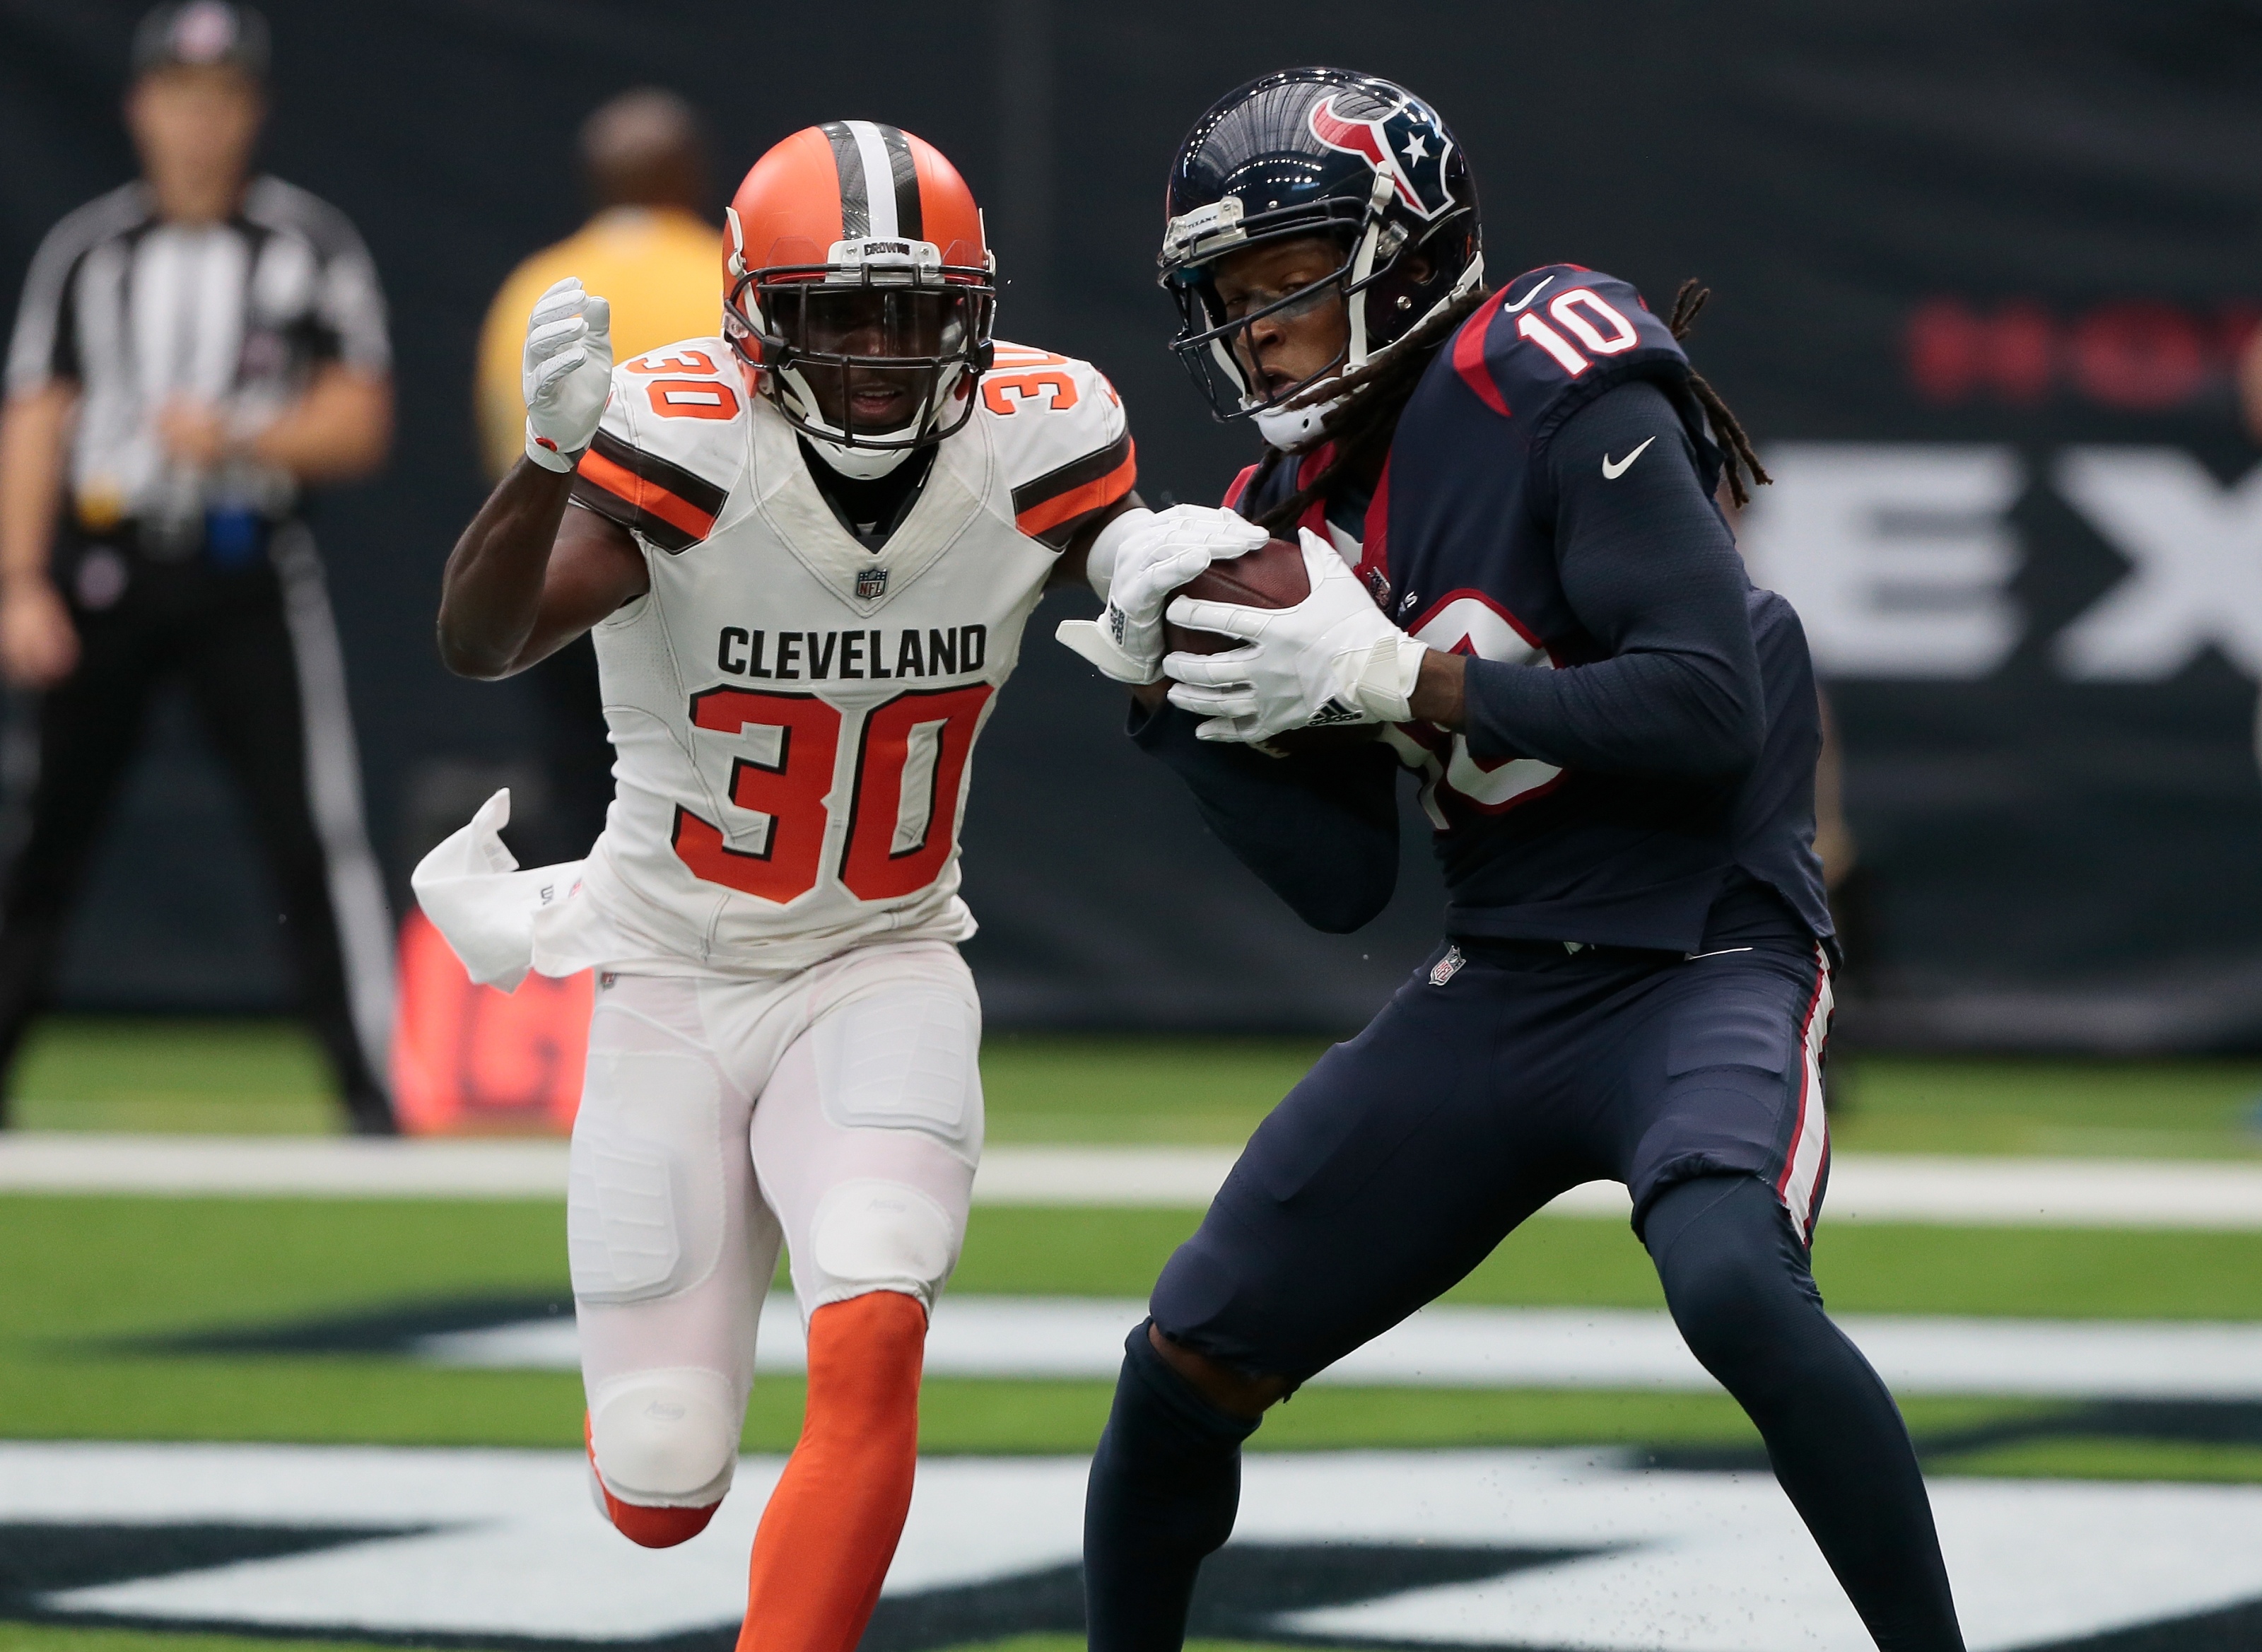 Houston Texans: Cleveland Browns will pose as a potential trap game